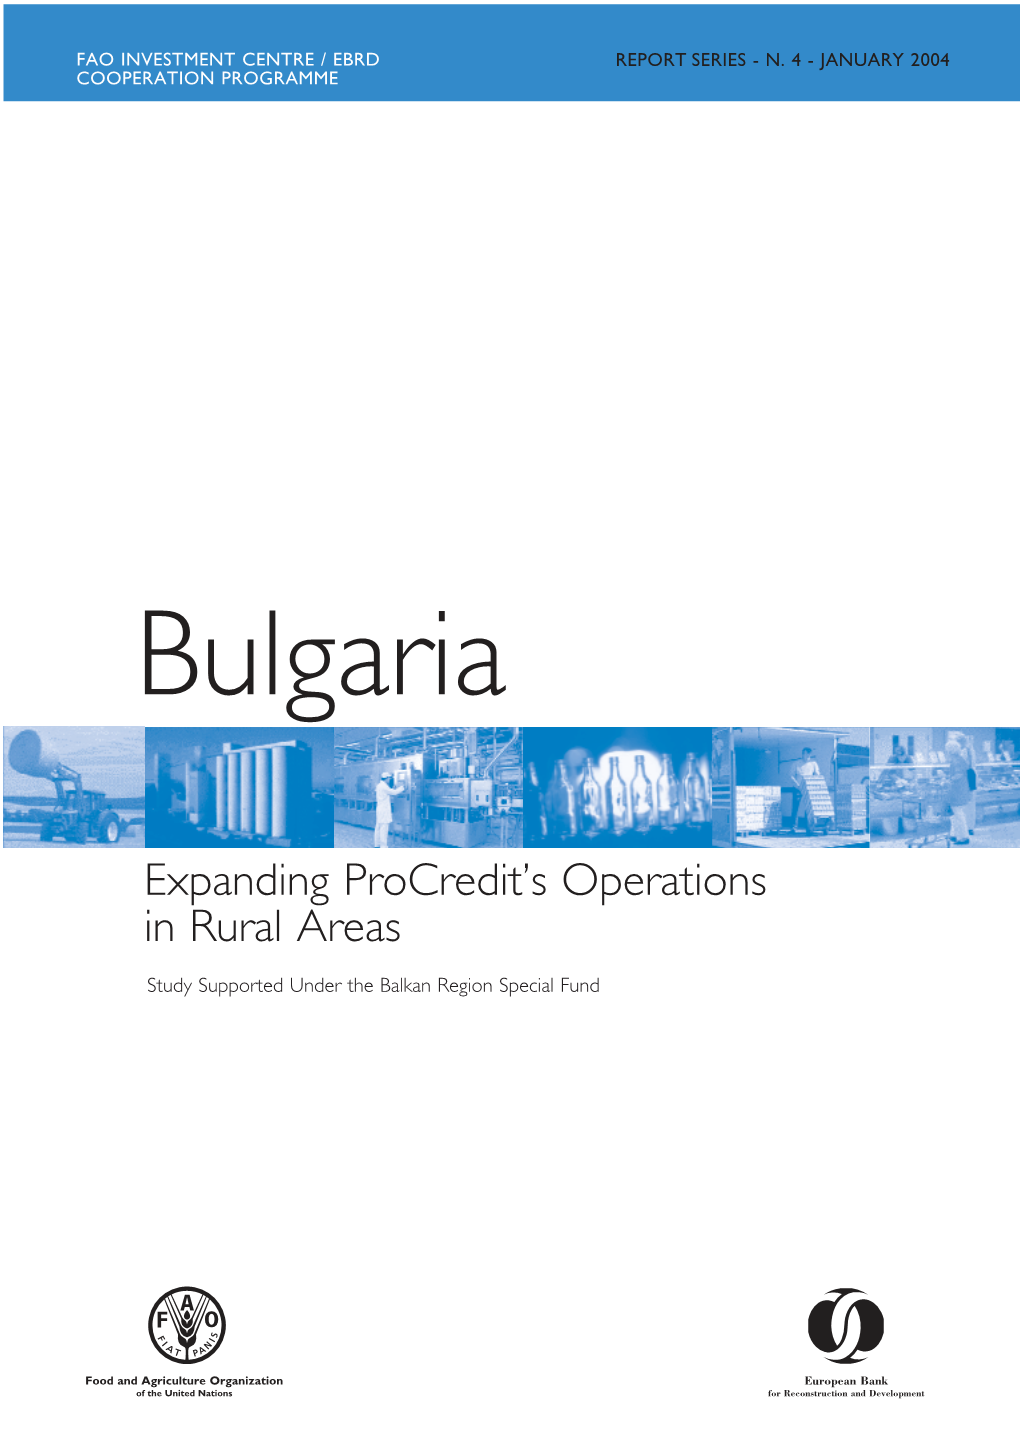 Bulgaria: Expanding Procredit's Operations in Rural Areas, No. 4